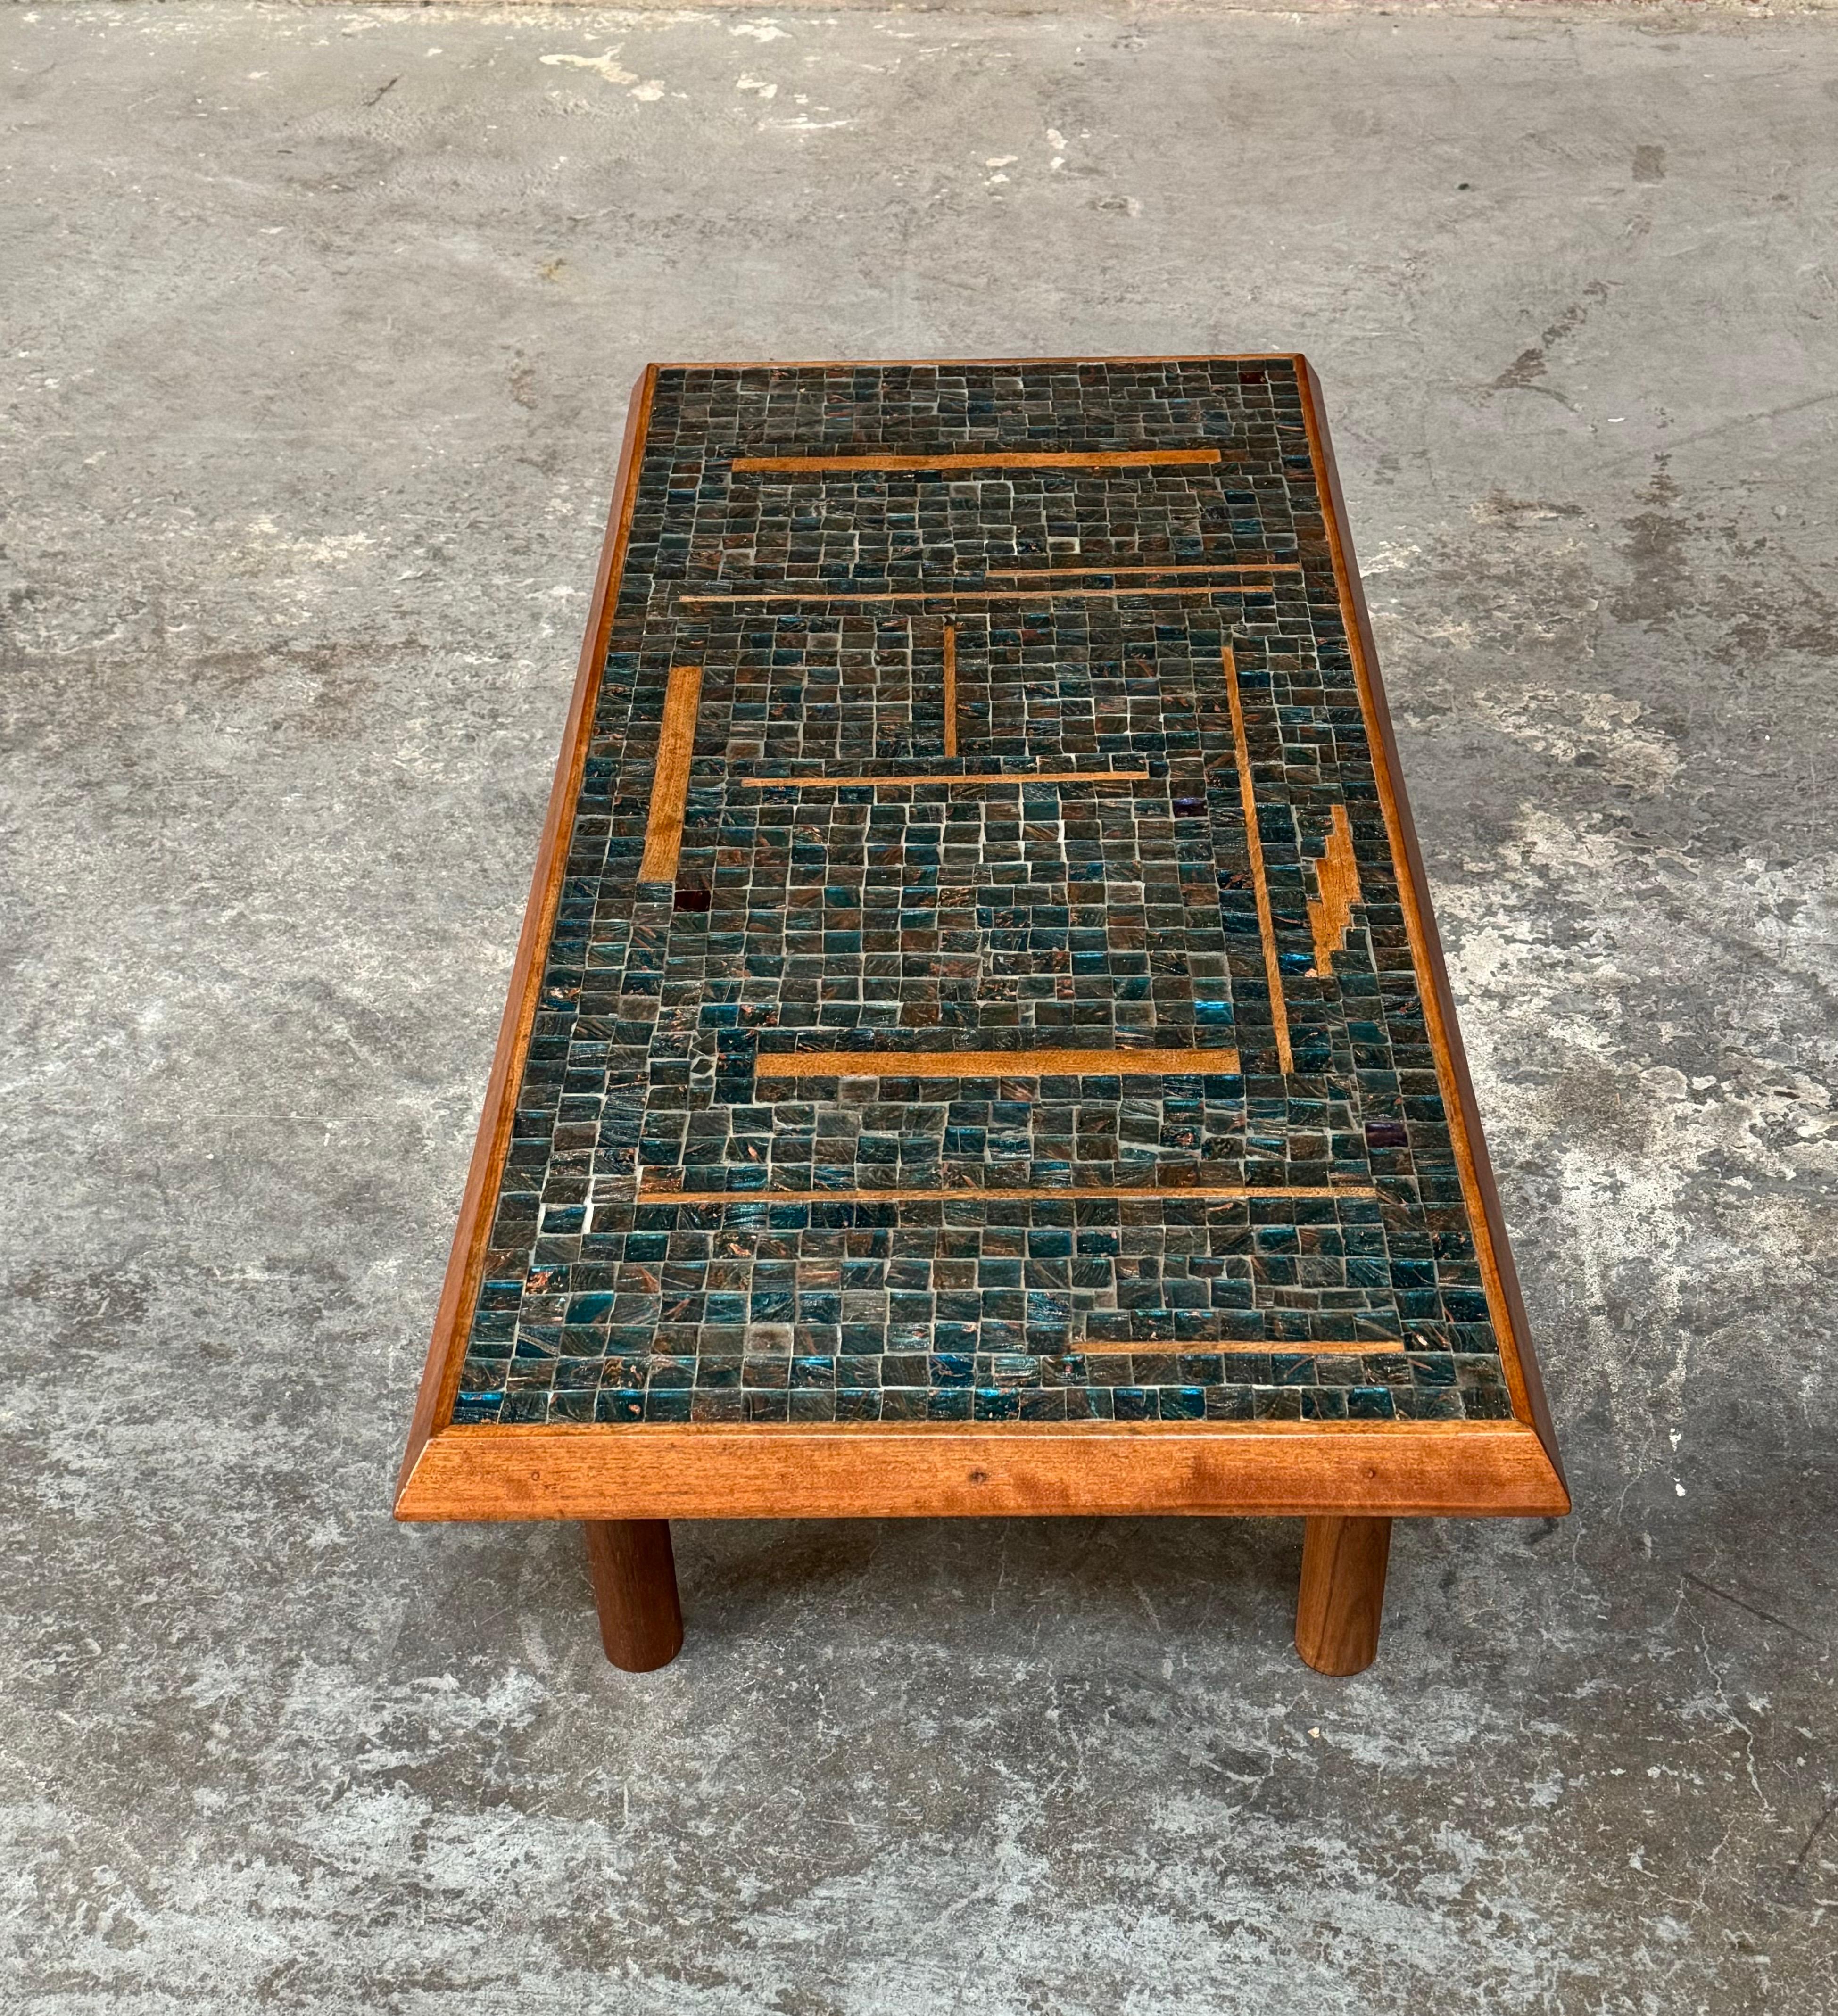 Art Glass 1950s Handmade  Glass Tile Mosaic with Walnut Inlay Coffee Table For Sale